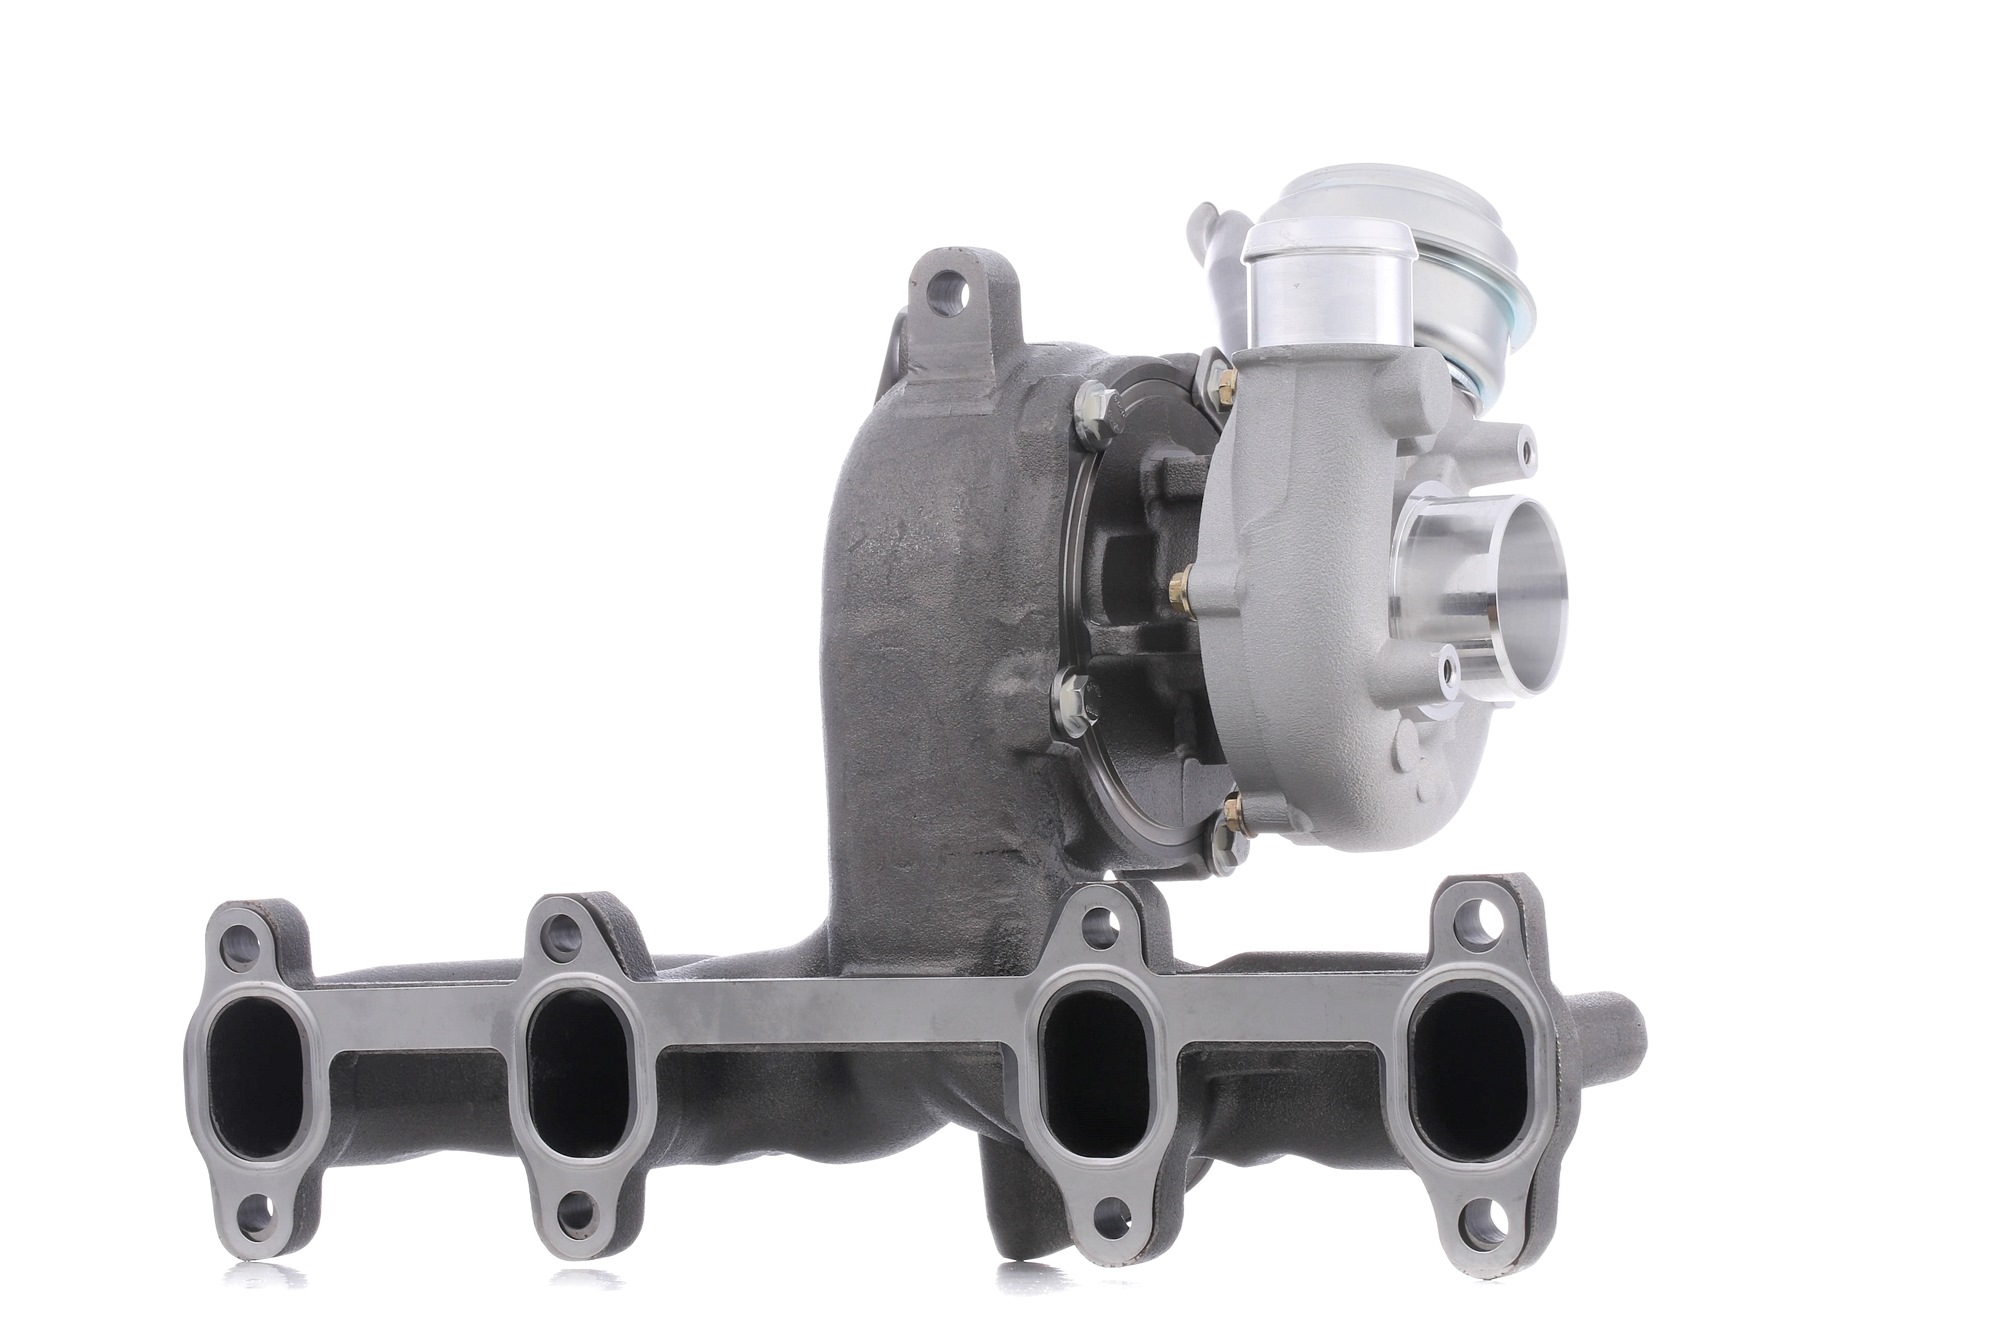 STARK SKCT-1190041 Turbocharger Exhaust Turbocharger, Vacuum-controlled, with gaskets/seals, Steel, Aluminium